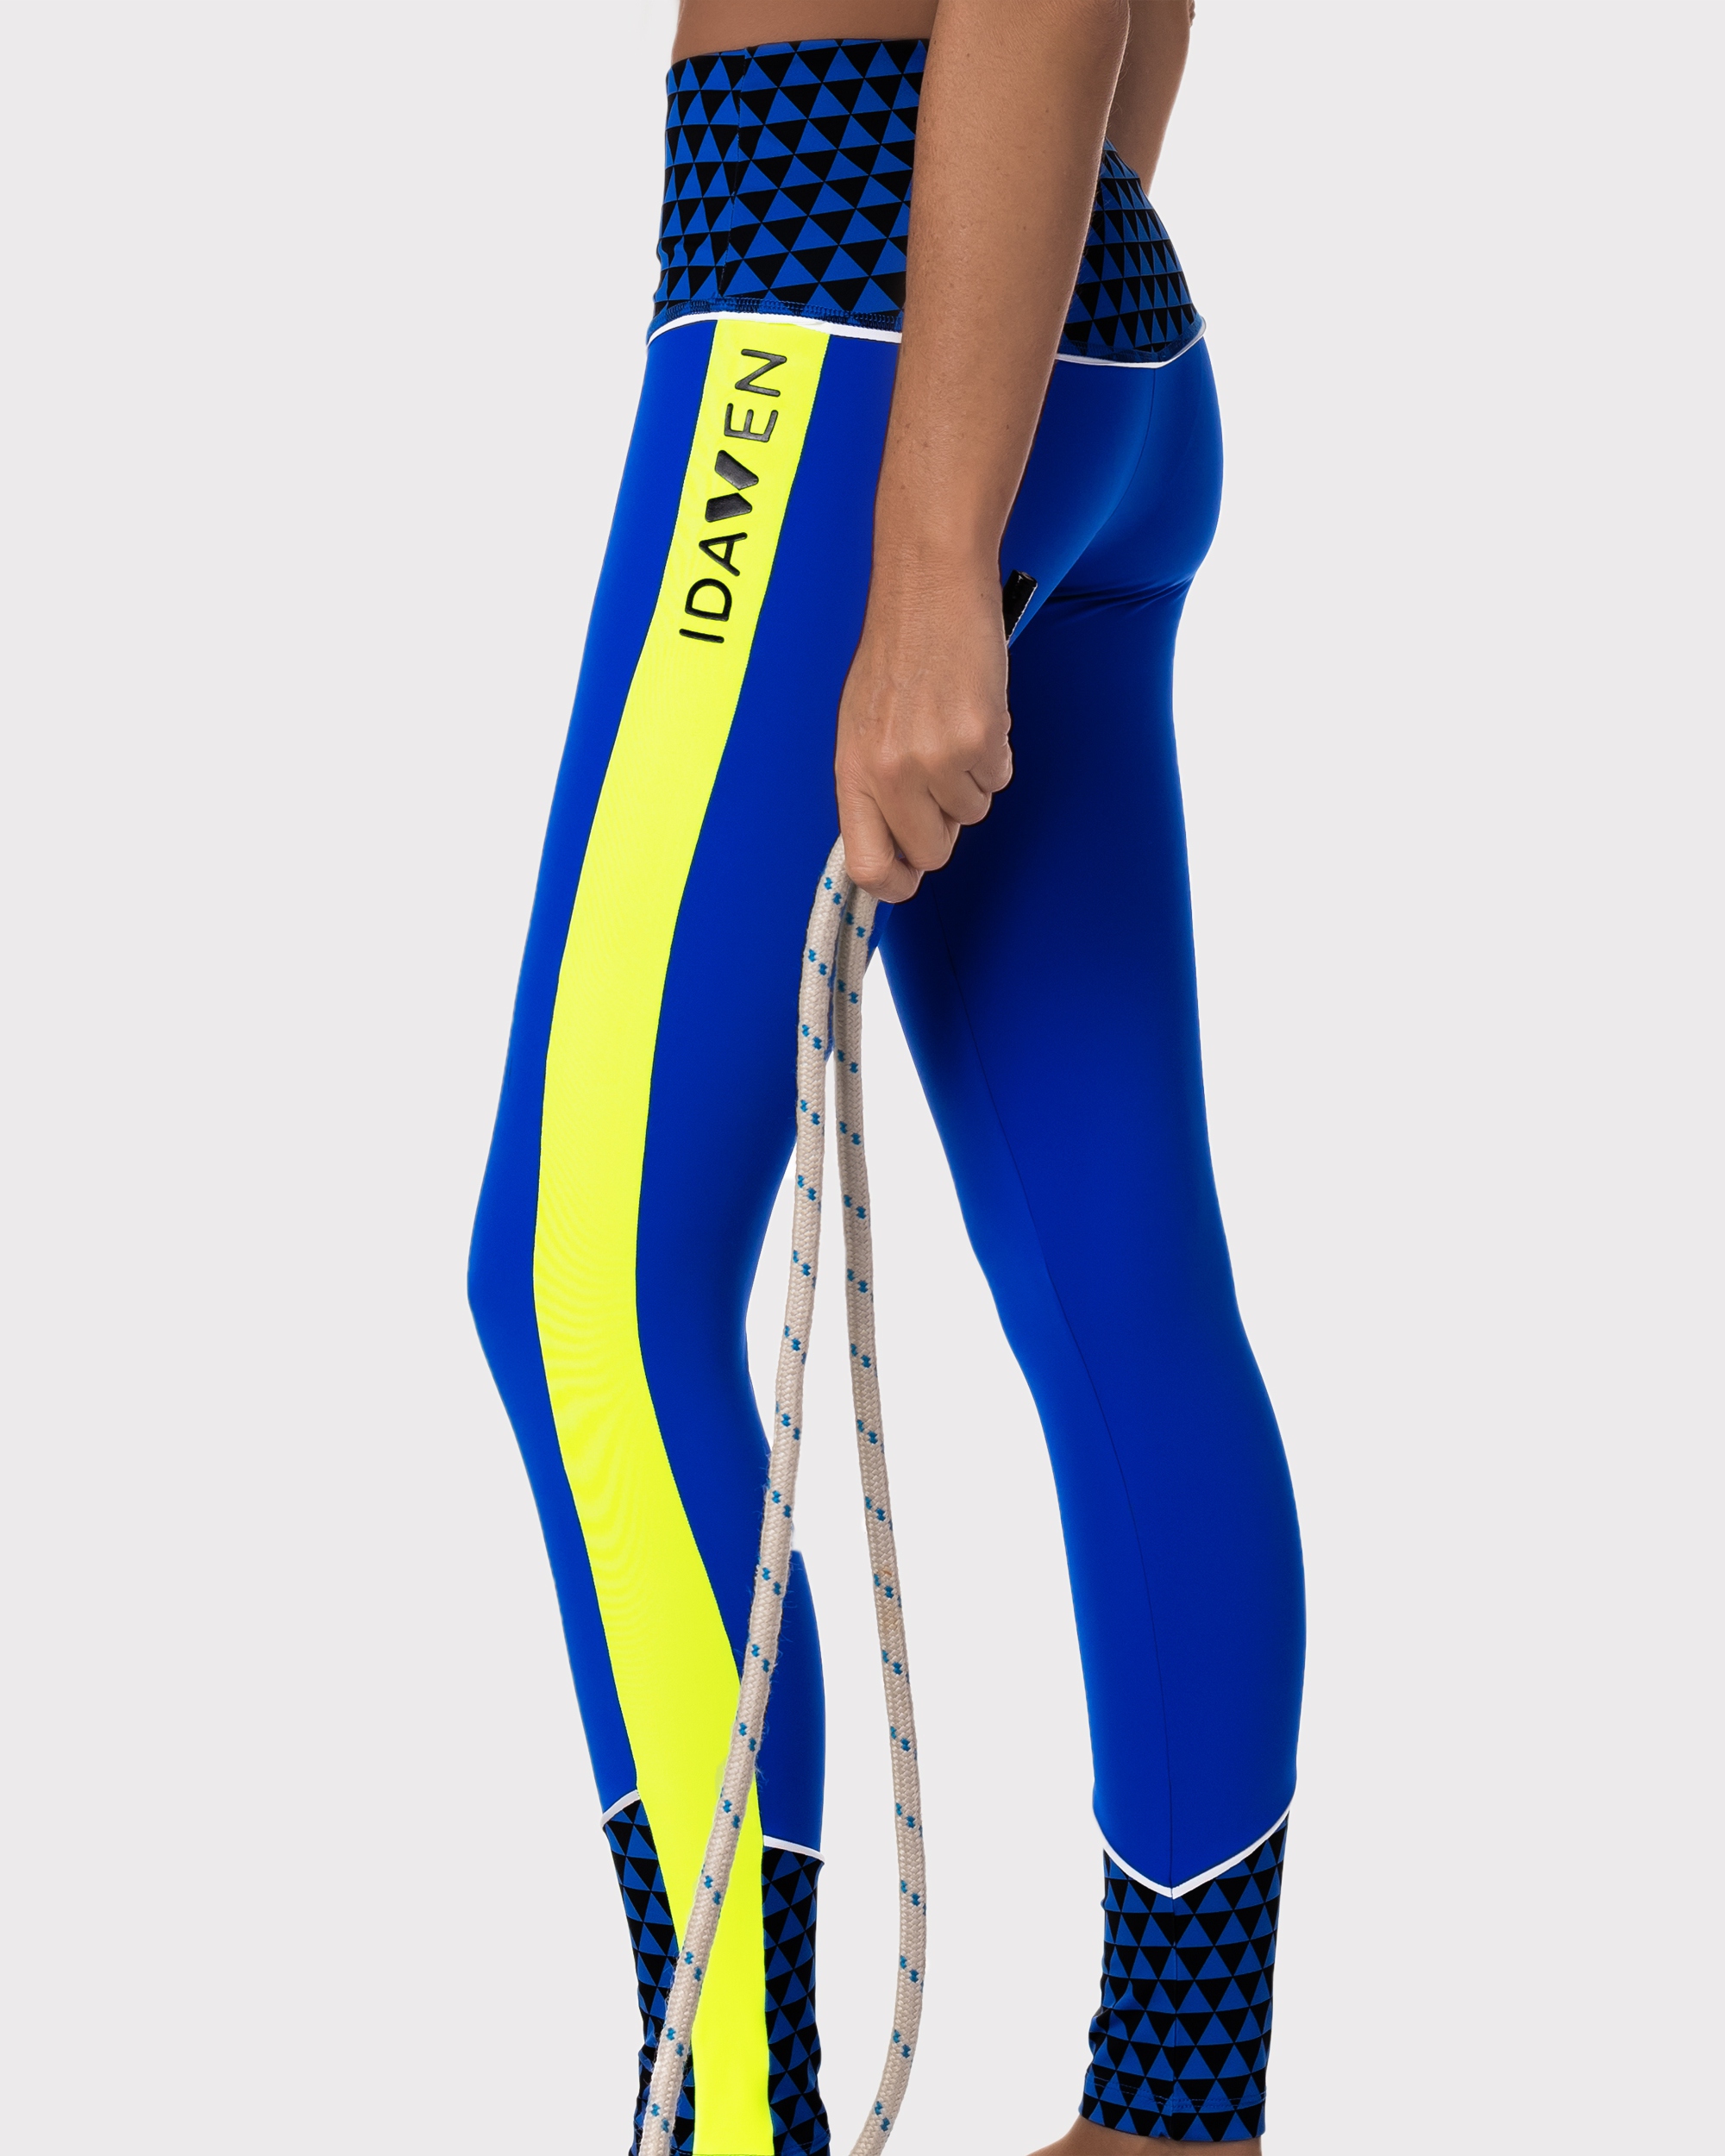 WOMEN LEGGINGS  SPORT  KLEIN Leggins made with one of the best